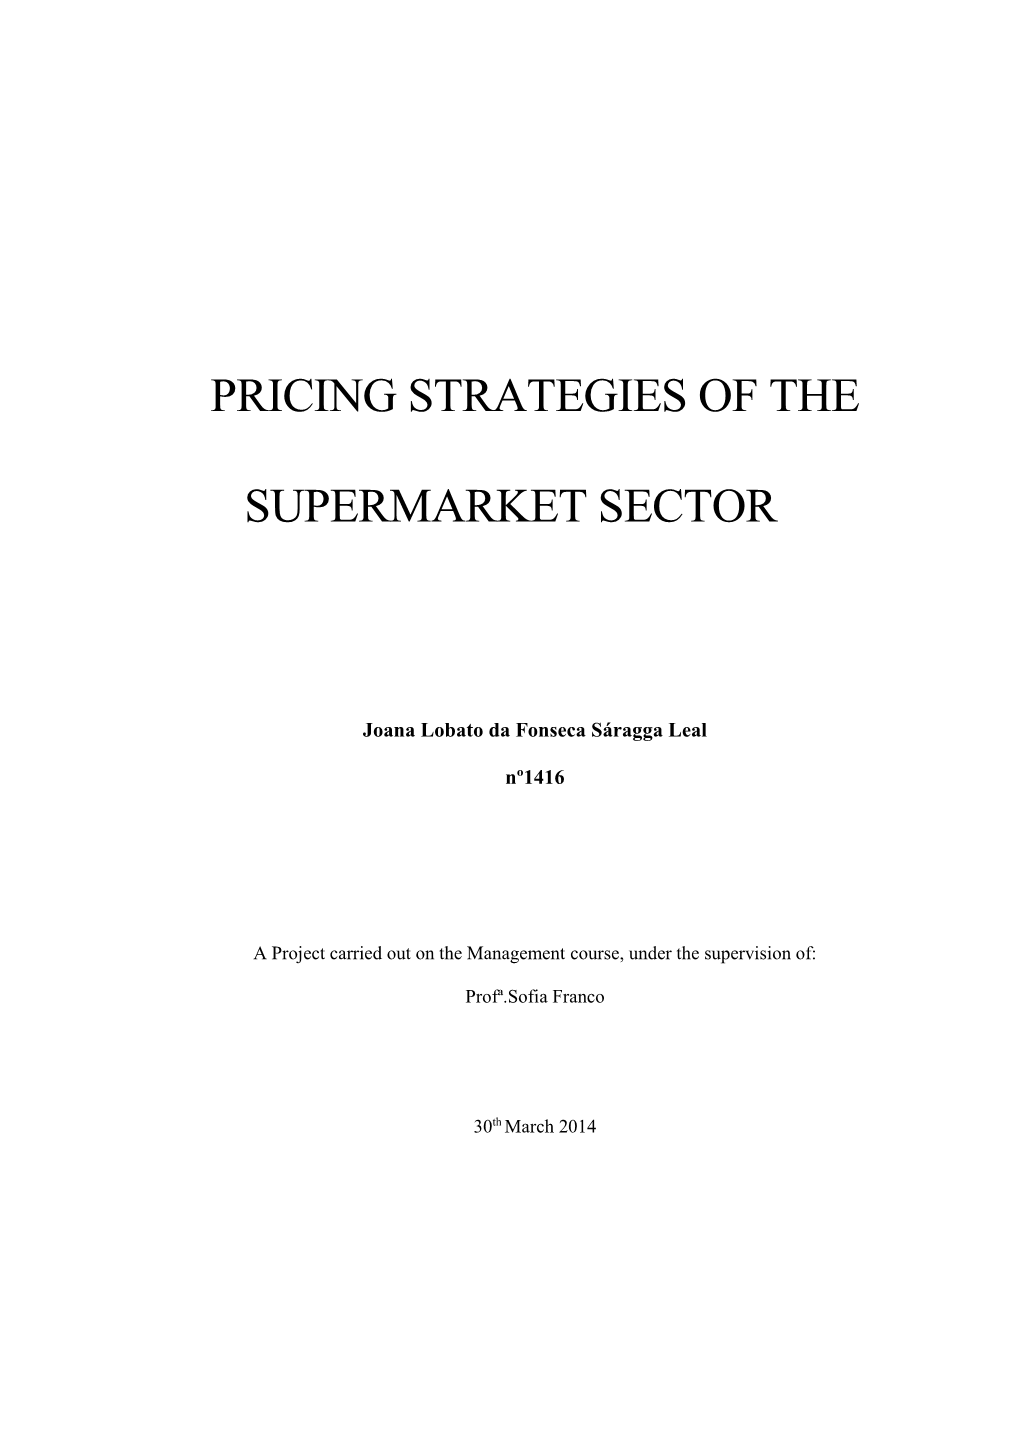 Pricing Strategies in the Supermarket Industry